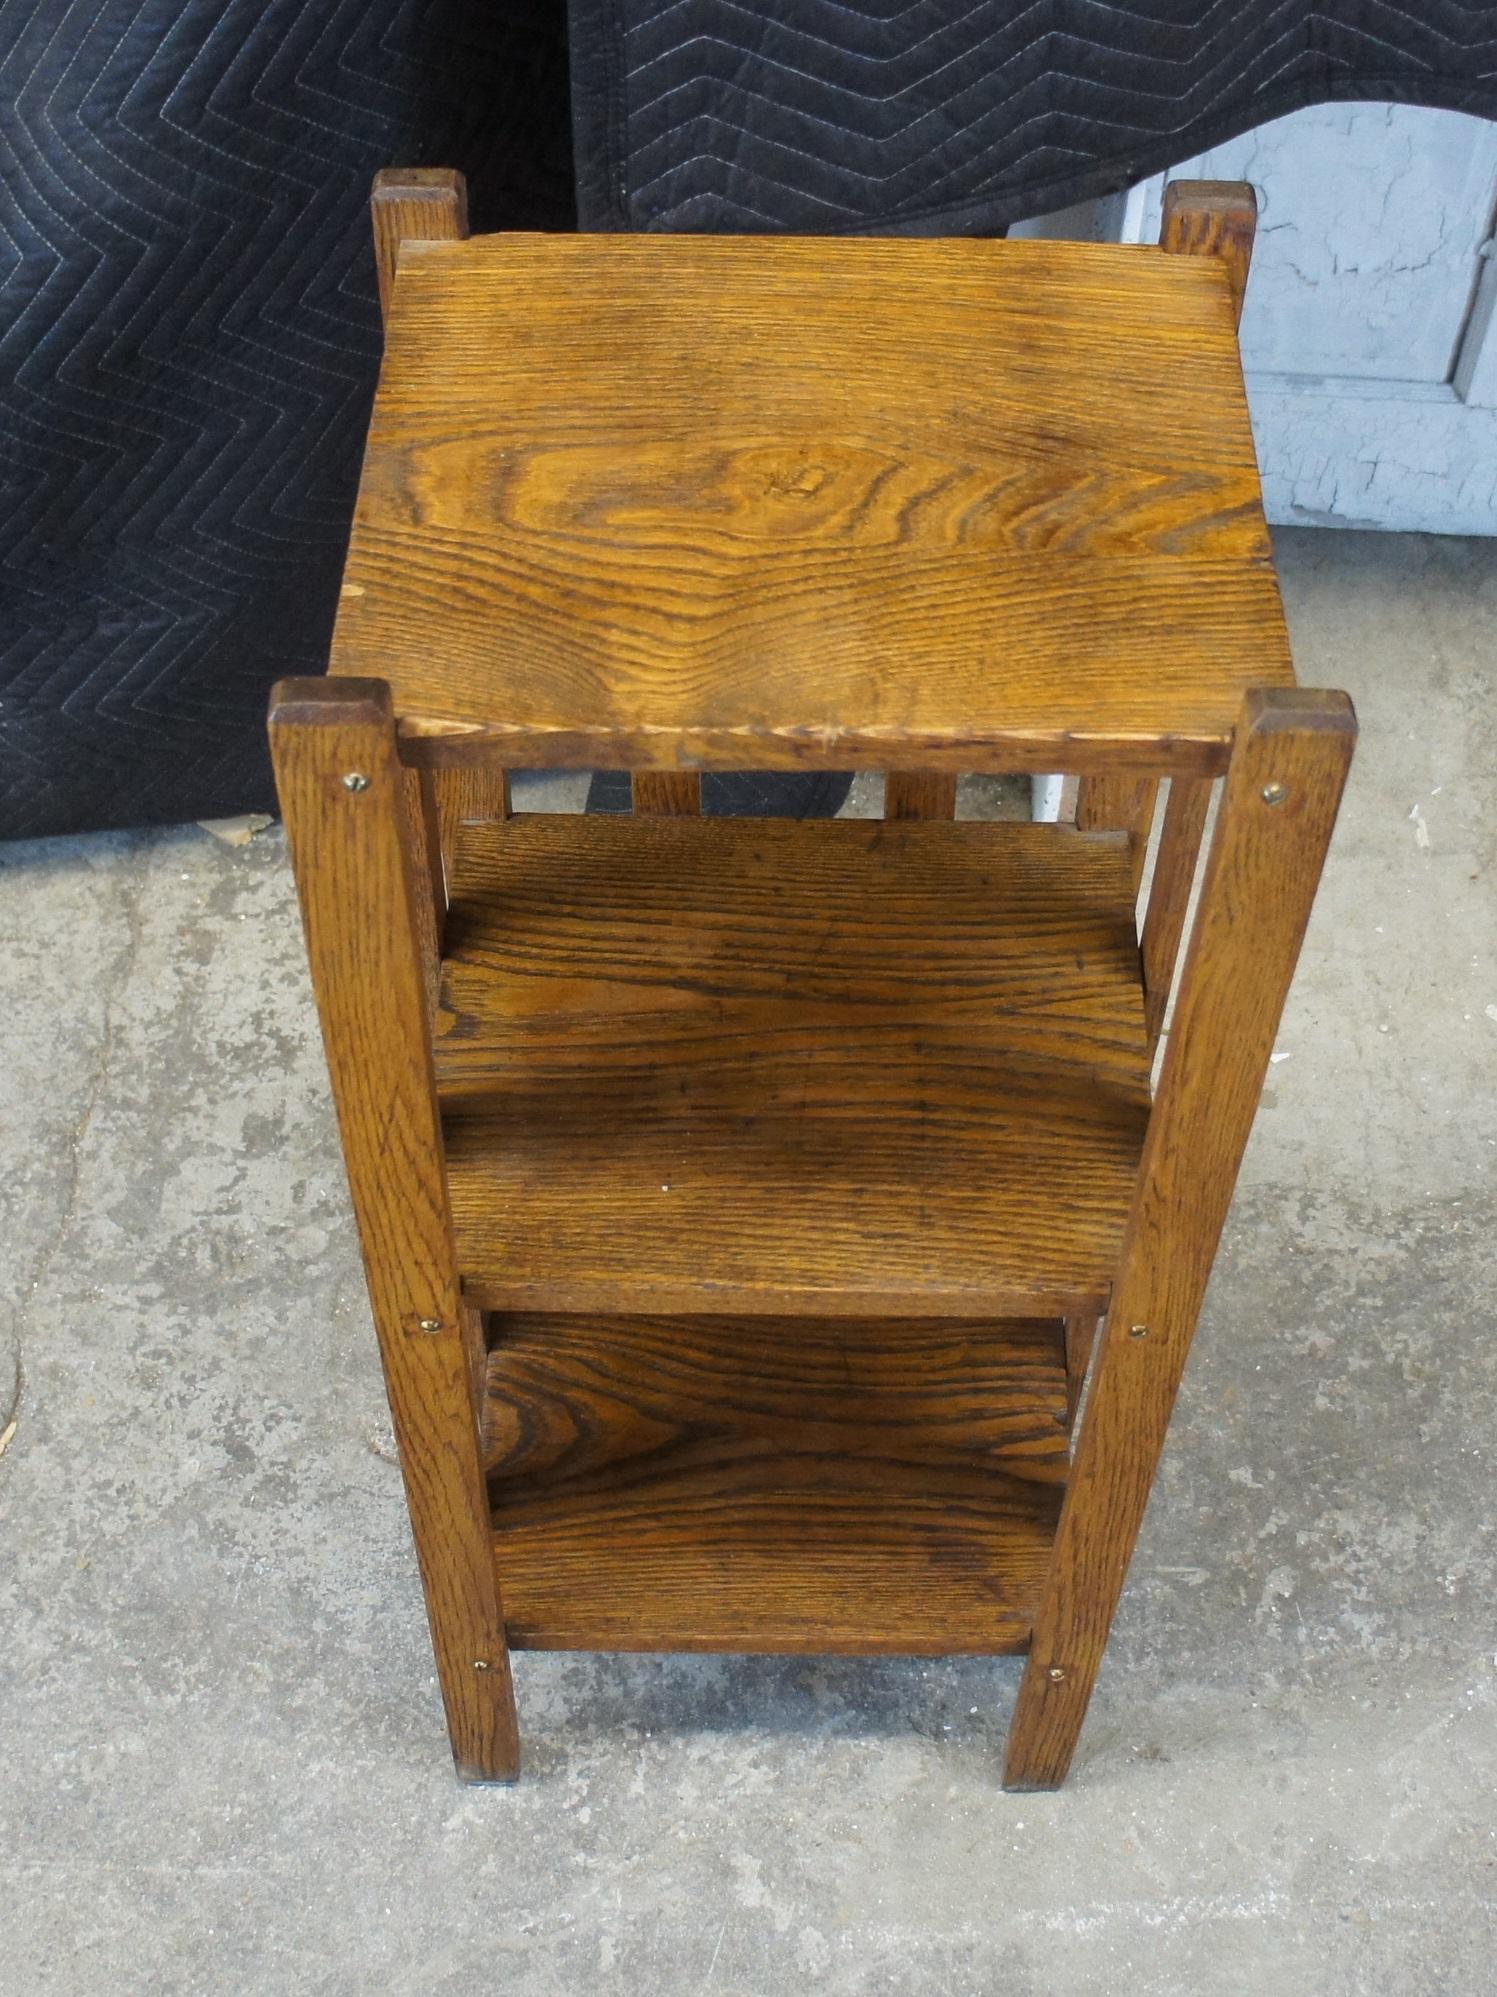 Mission Arts & Crafts Quartersawn Oak Bookshelf Pedestal Plant Stand Side Table In Good Condition For Sale In Dayton, OH